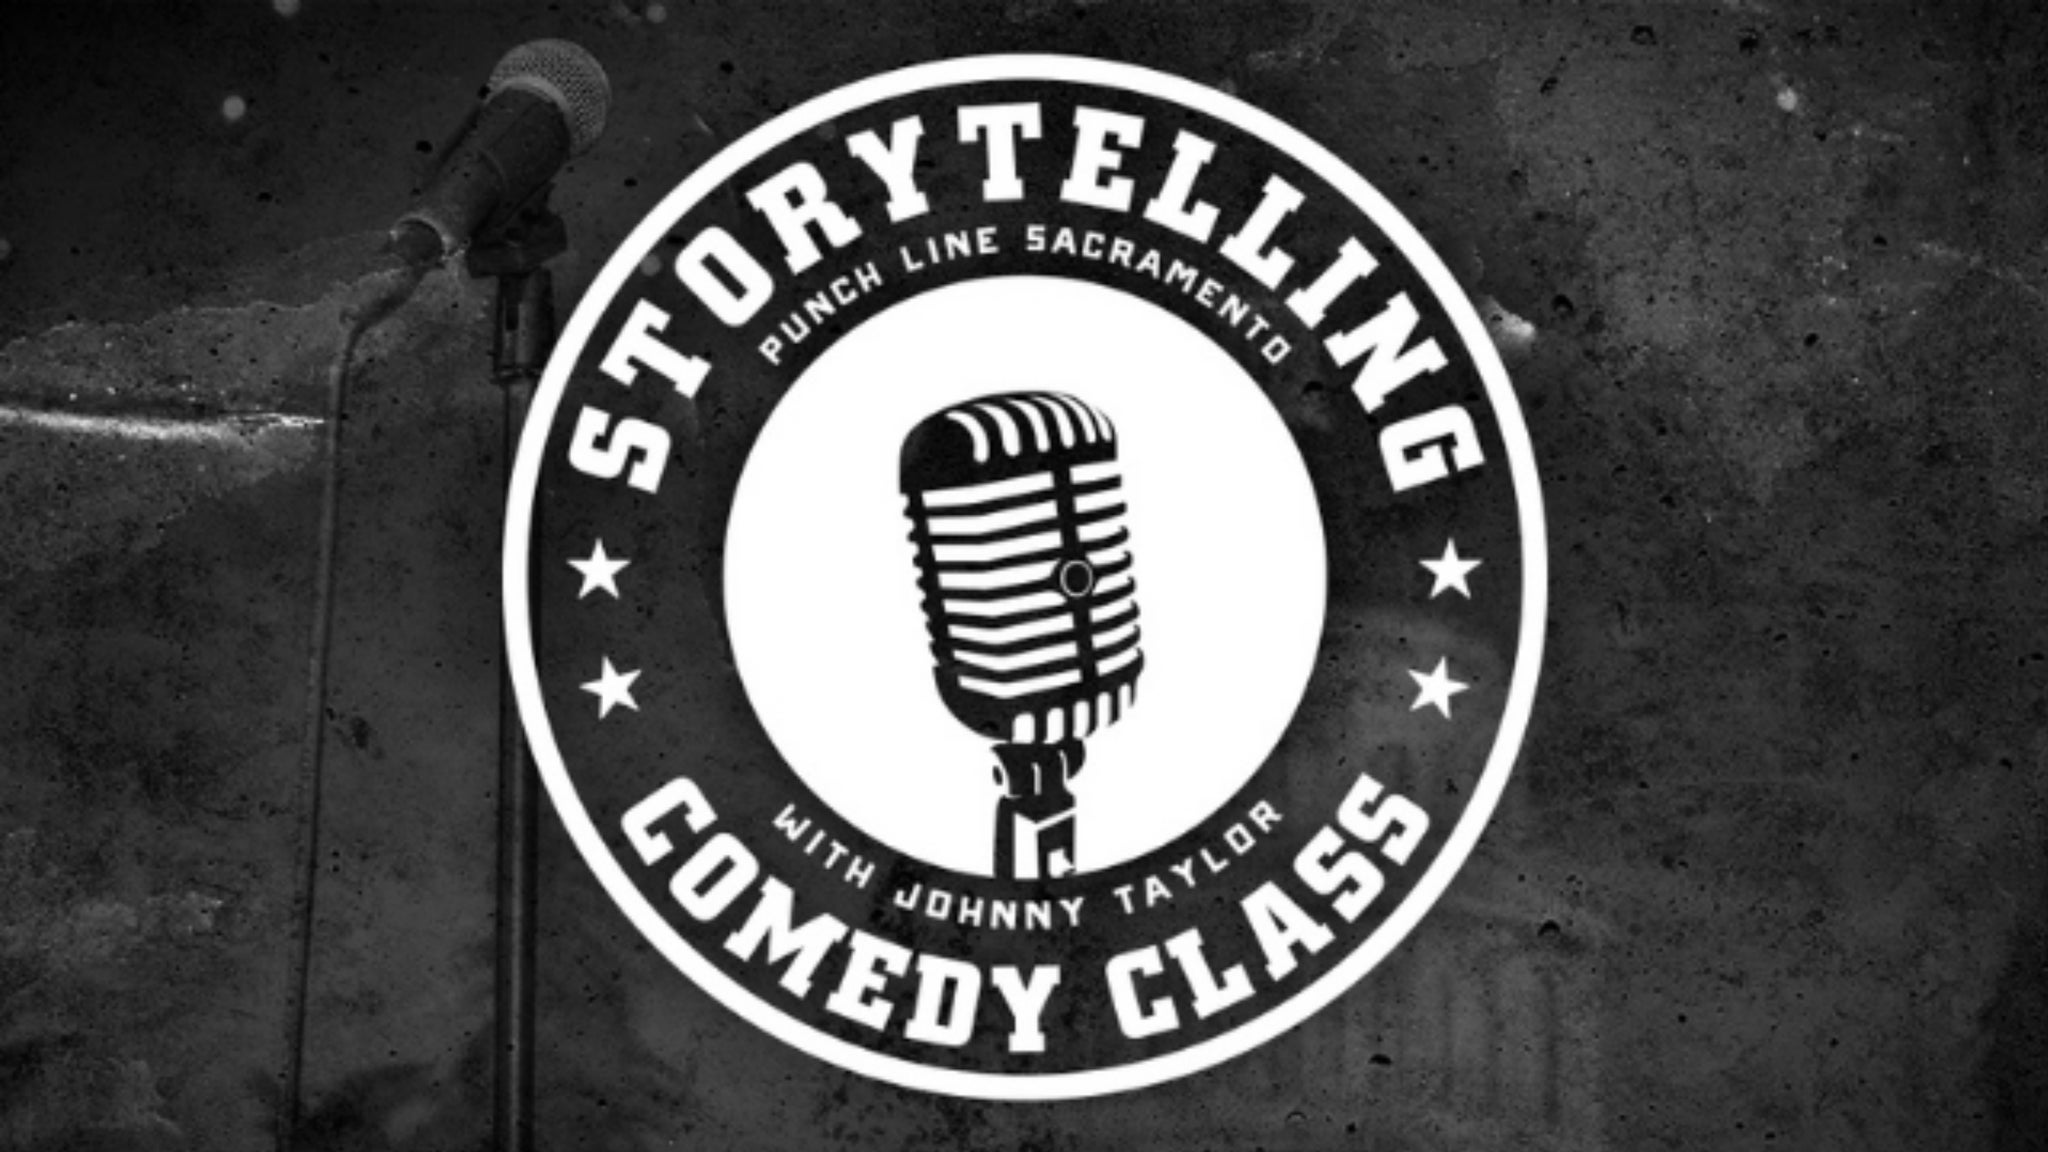 Johnny Taylor's Storytelling Grad Show - in the Callback Bar